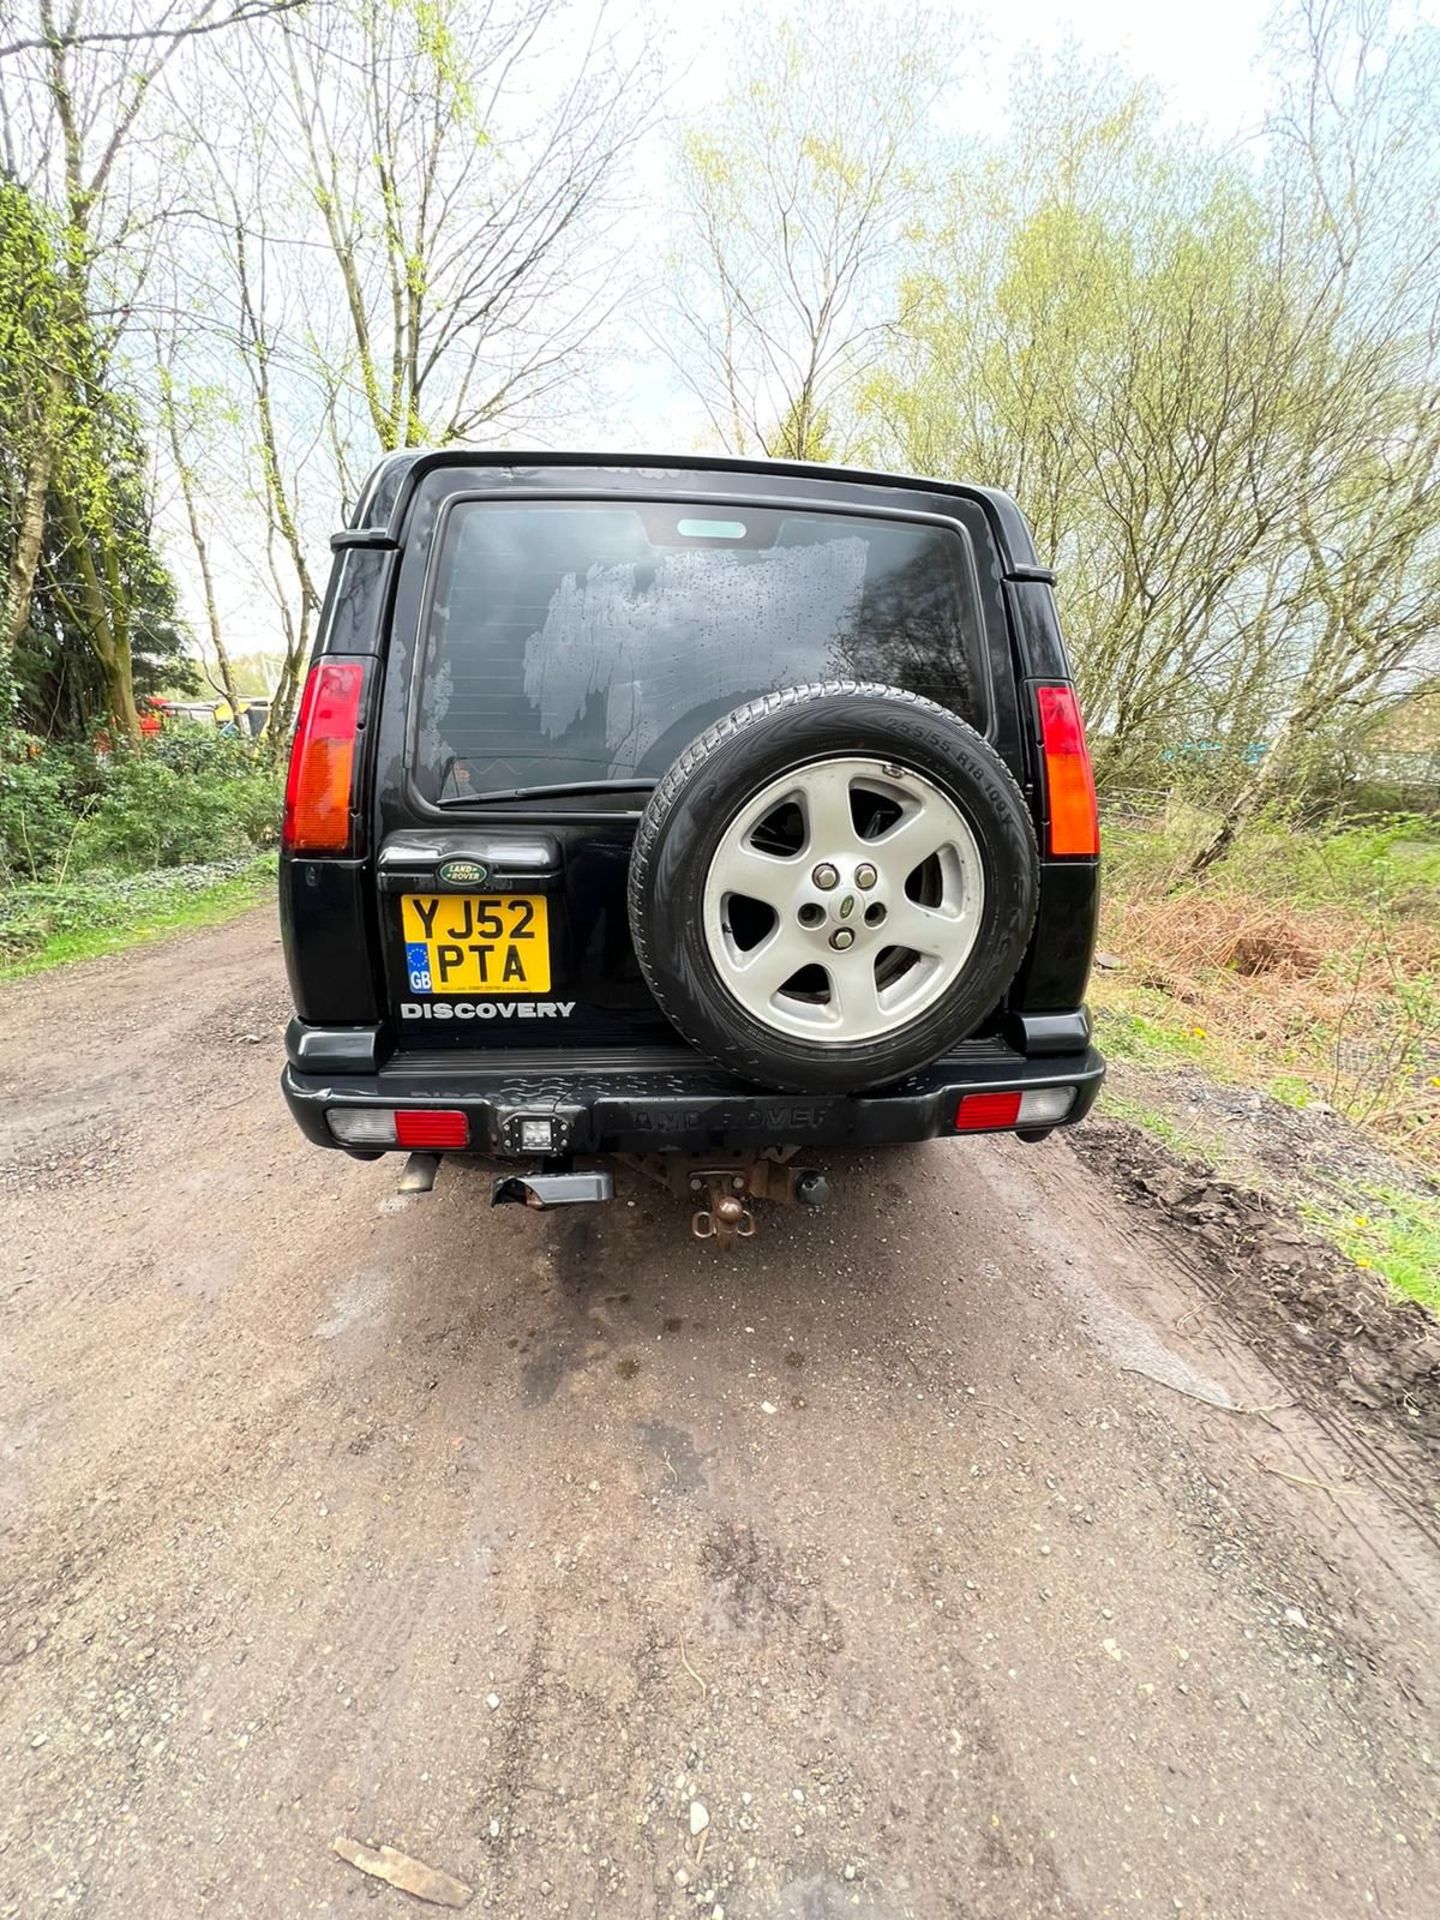 2002 52 PLATE LAND ROVER DISCOVERY 2 SUV ESTATE - TD5 - TOP OF THE RANGE - HALF LEATHER SEATS - Image 11 of 15